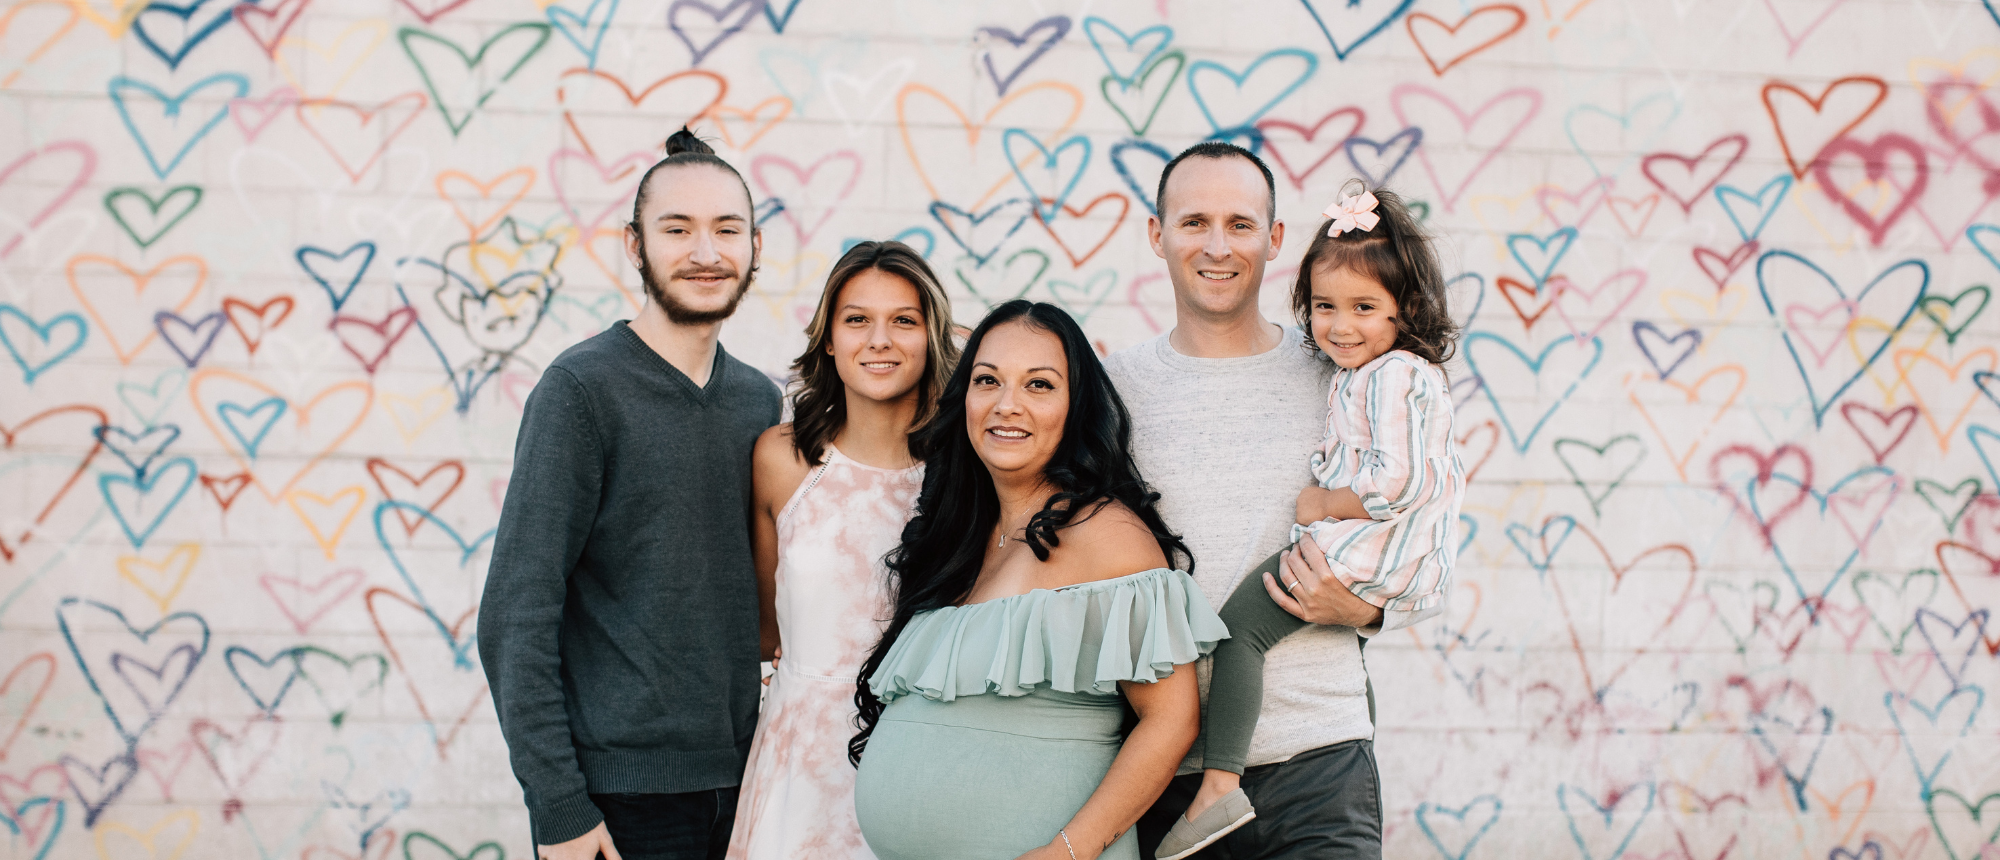 Multi-Generational Family in front of a wall with multi-colored hearts painted on it.